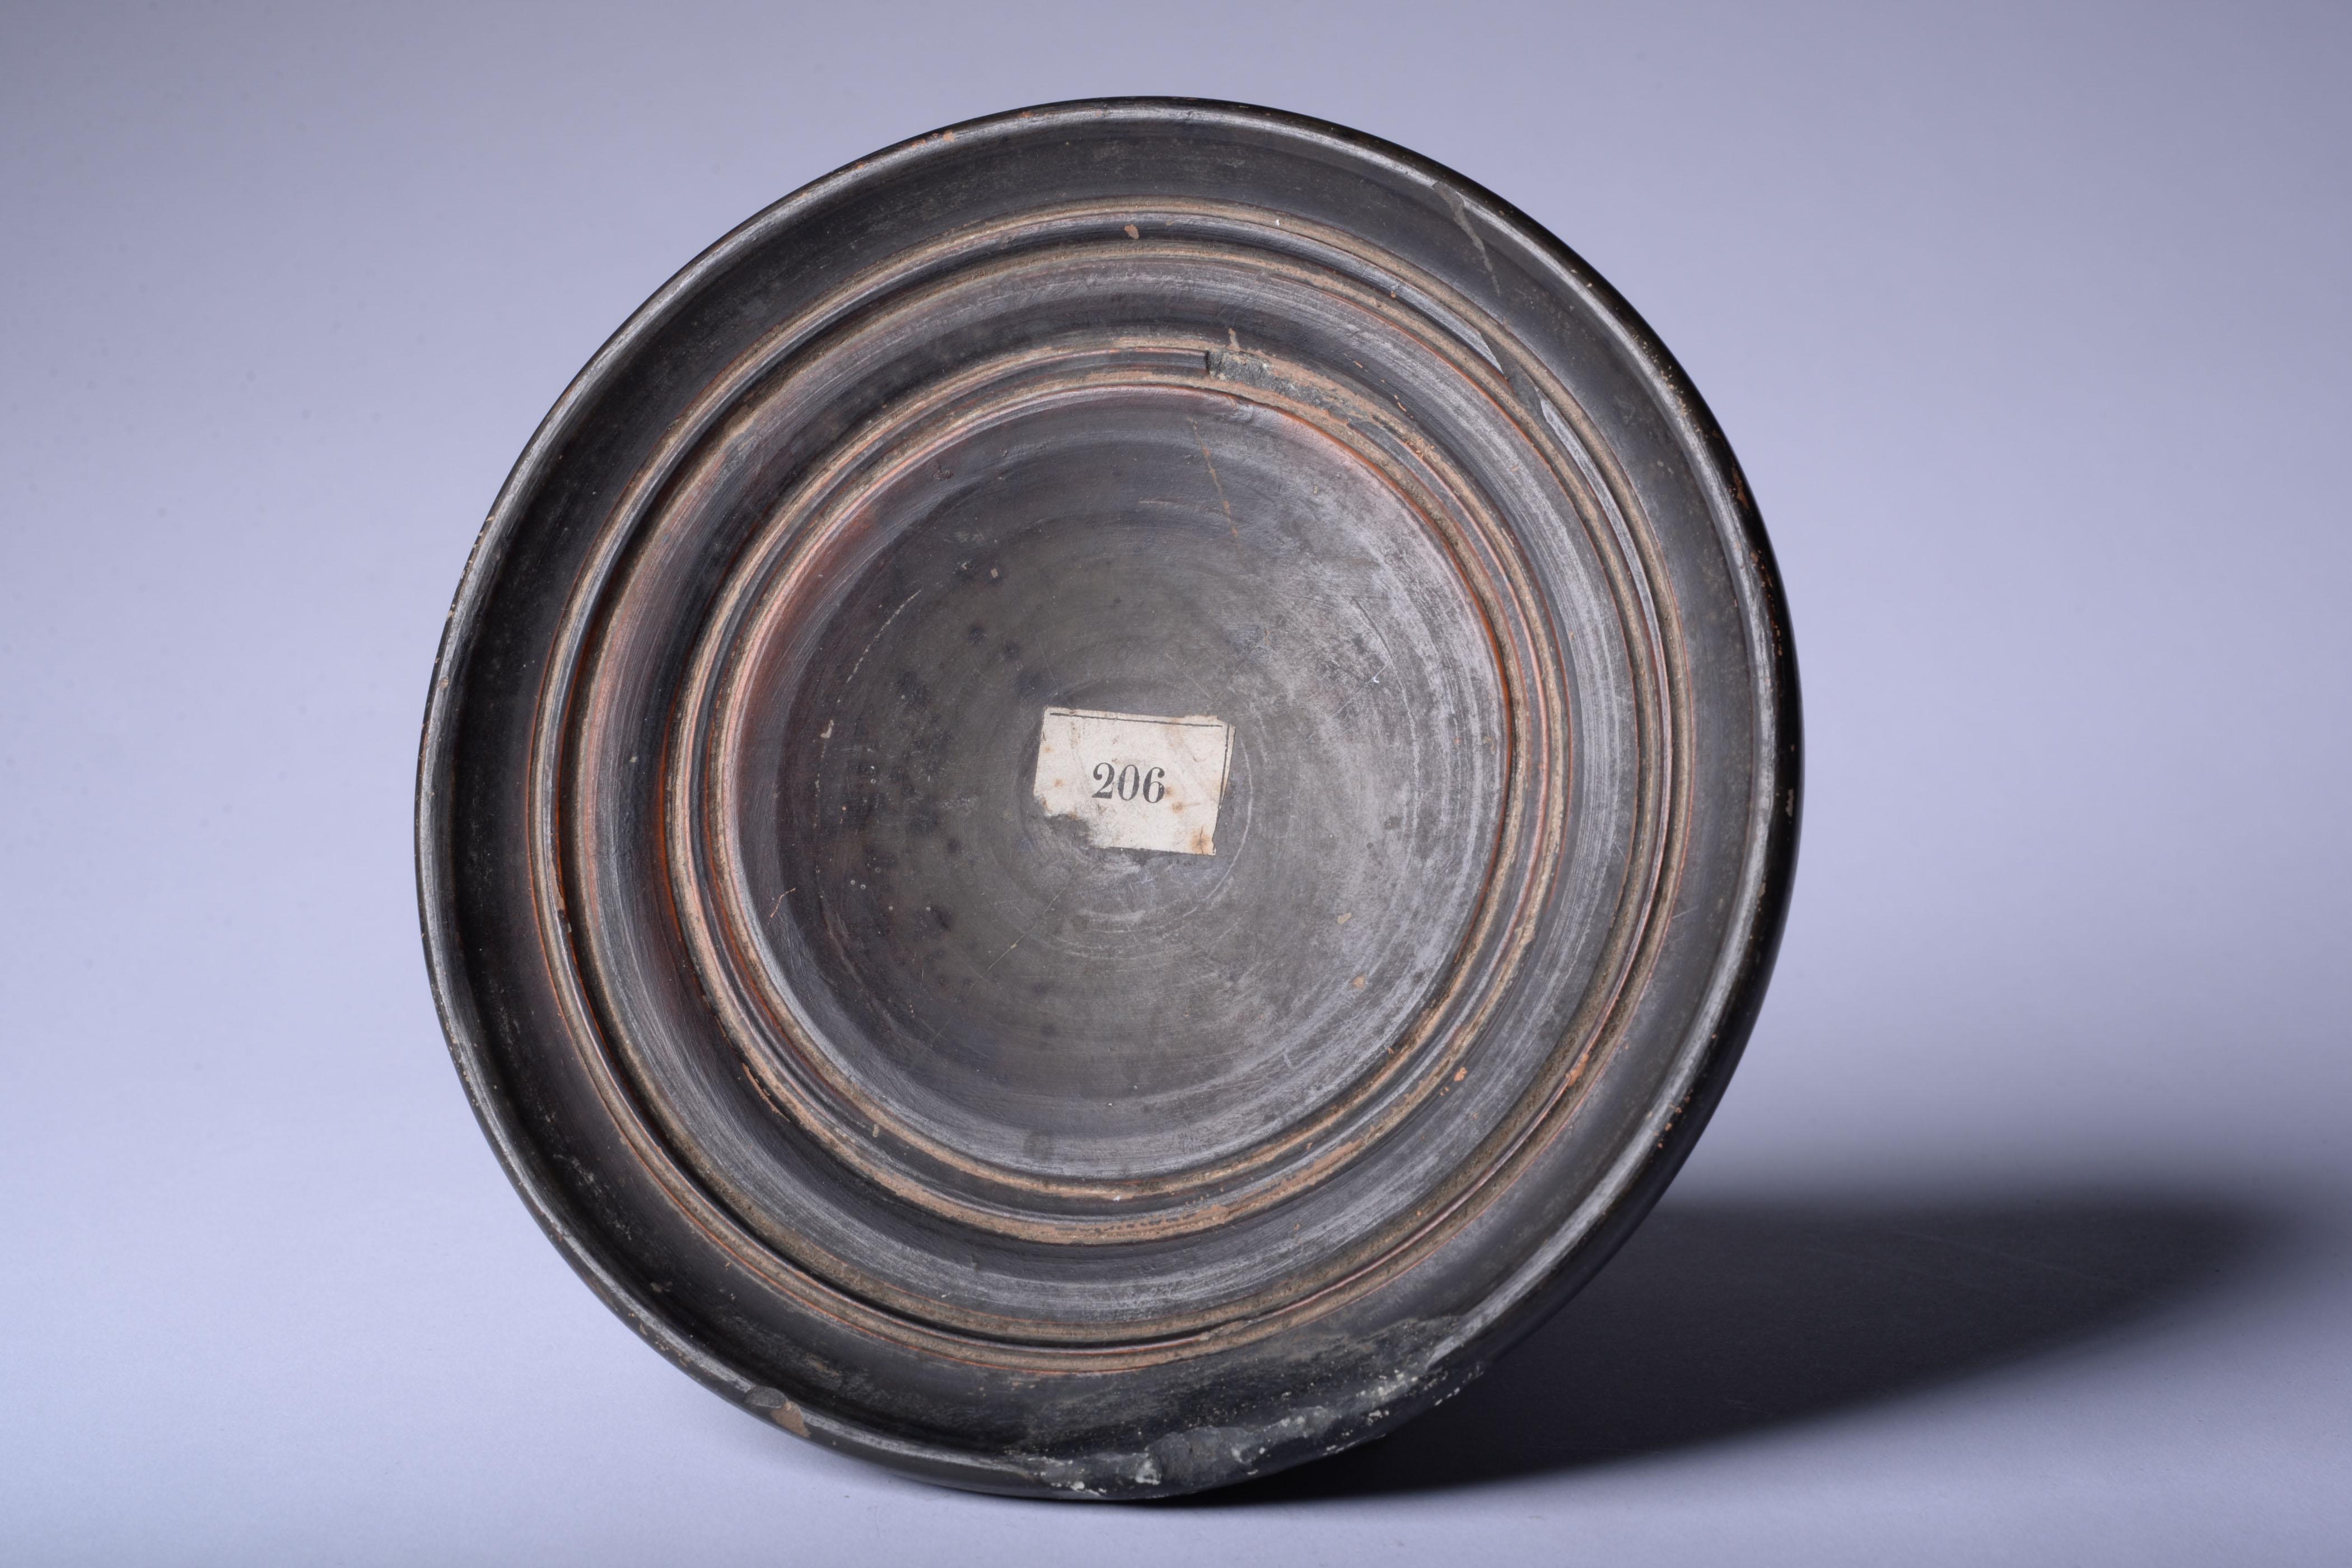 Ancient Greek black glaze terracotta dish 
South Italy
circa 4th century B.C.

A pleasing Greek black-glaze dish, with deep concentric grooves around the base, mirrored on the surface with delicate red ochre concentric rings. The piece is a fine